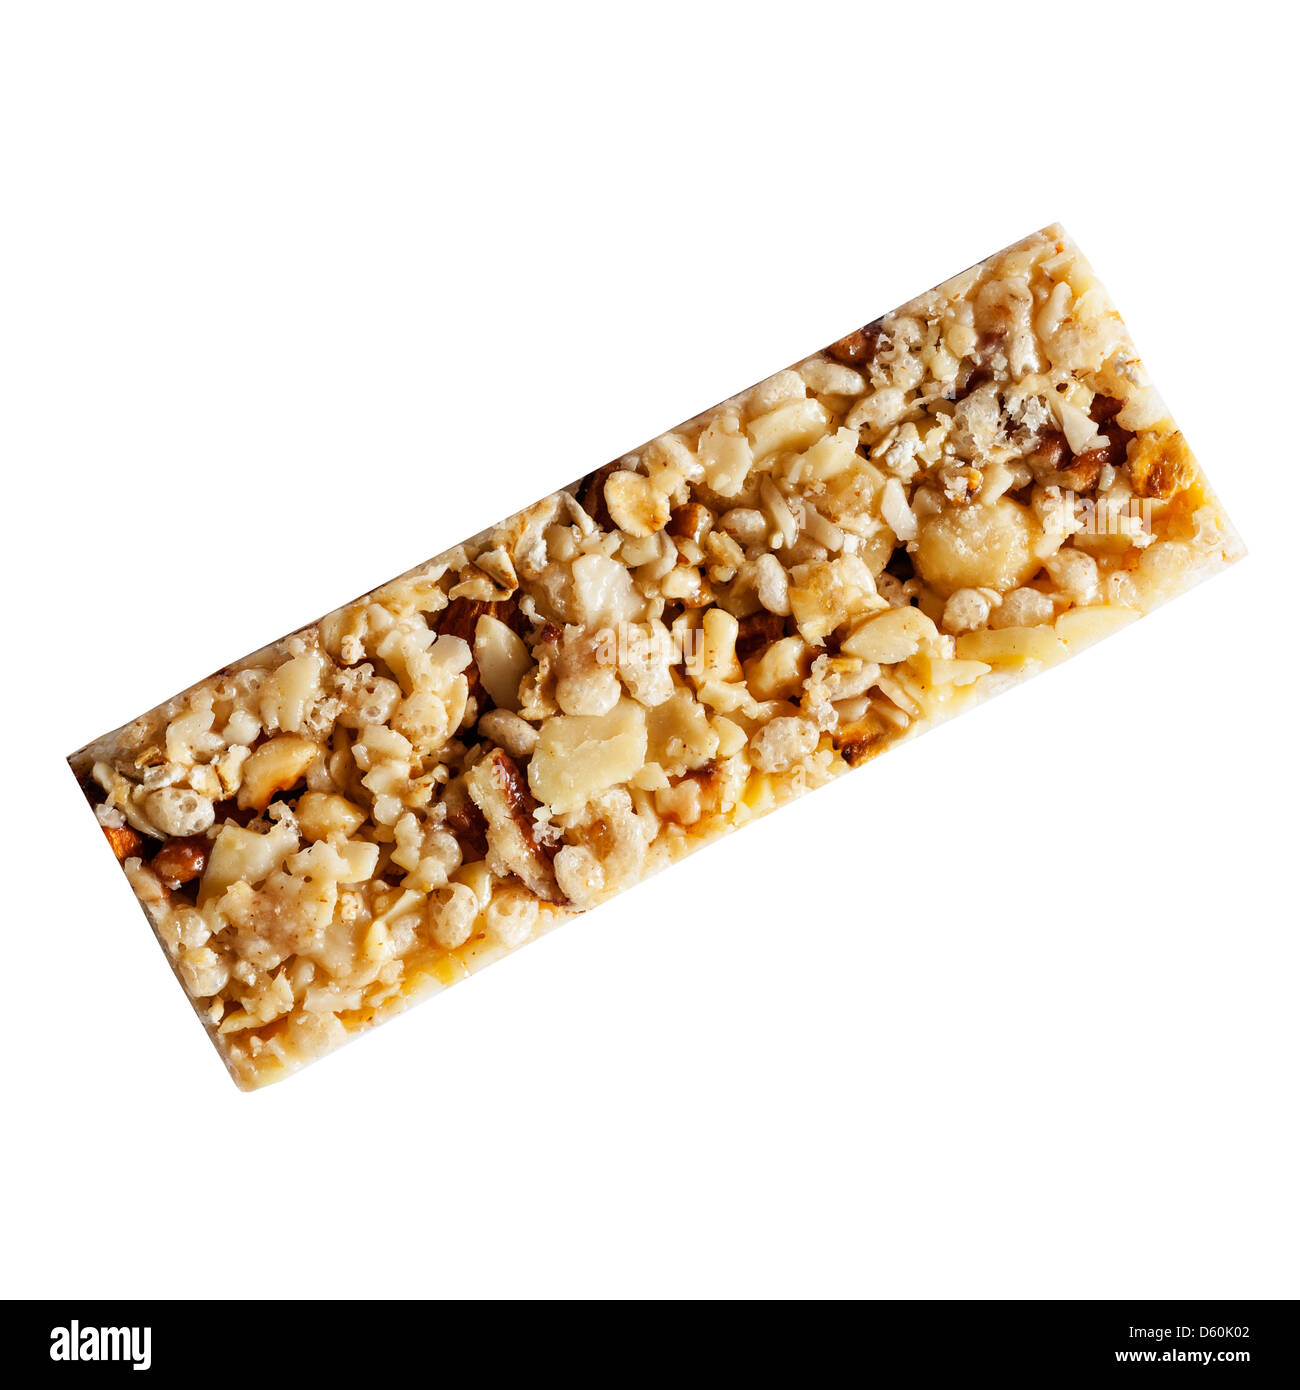 A Jordans absolute nut nutty cereal bar on a white background Stock Photo